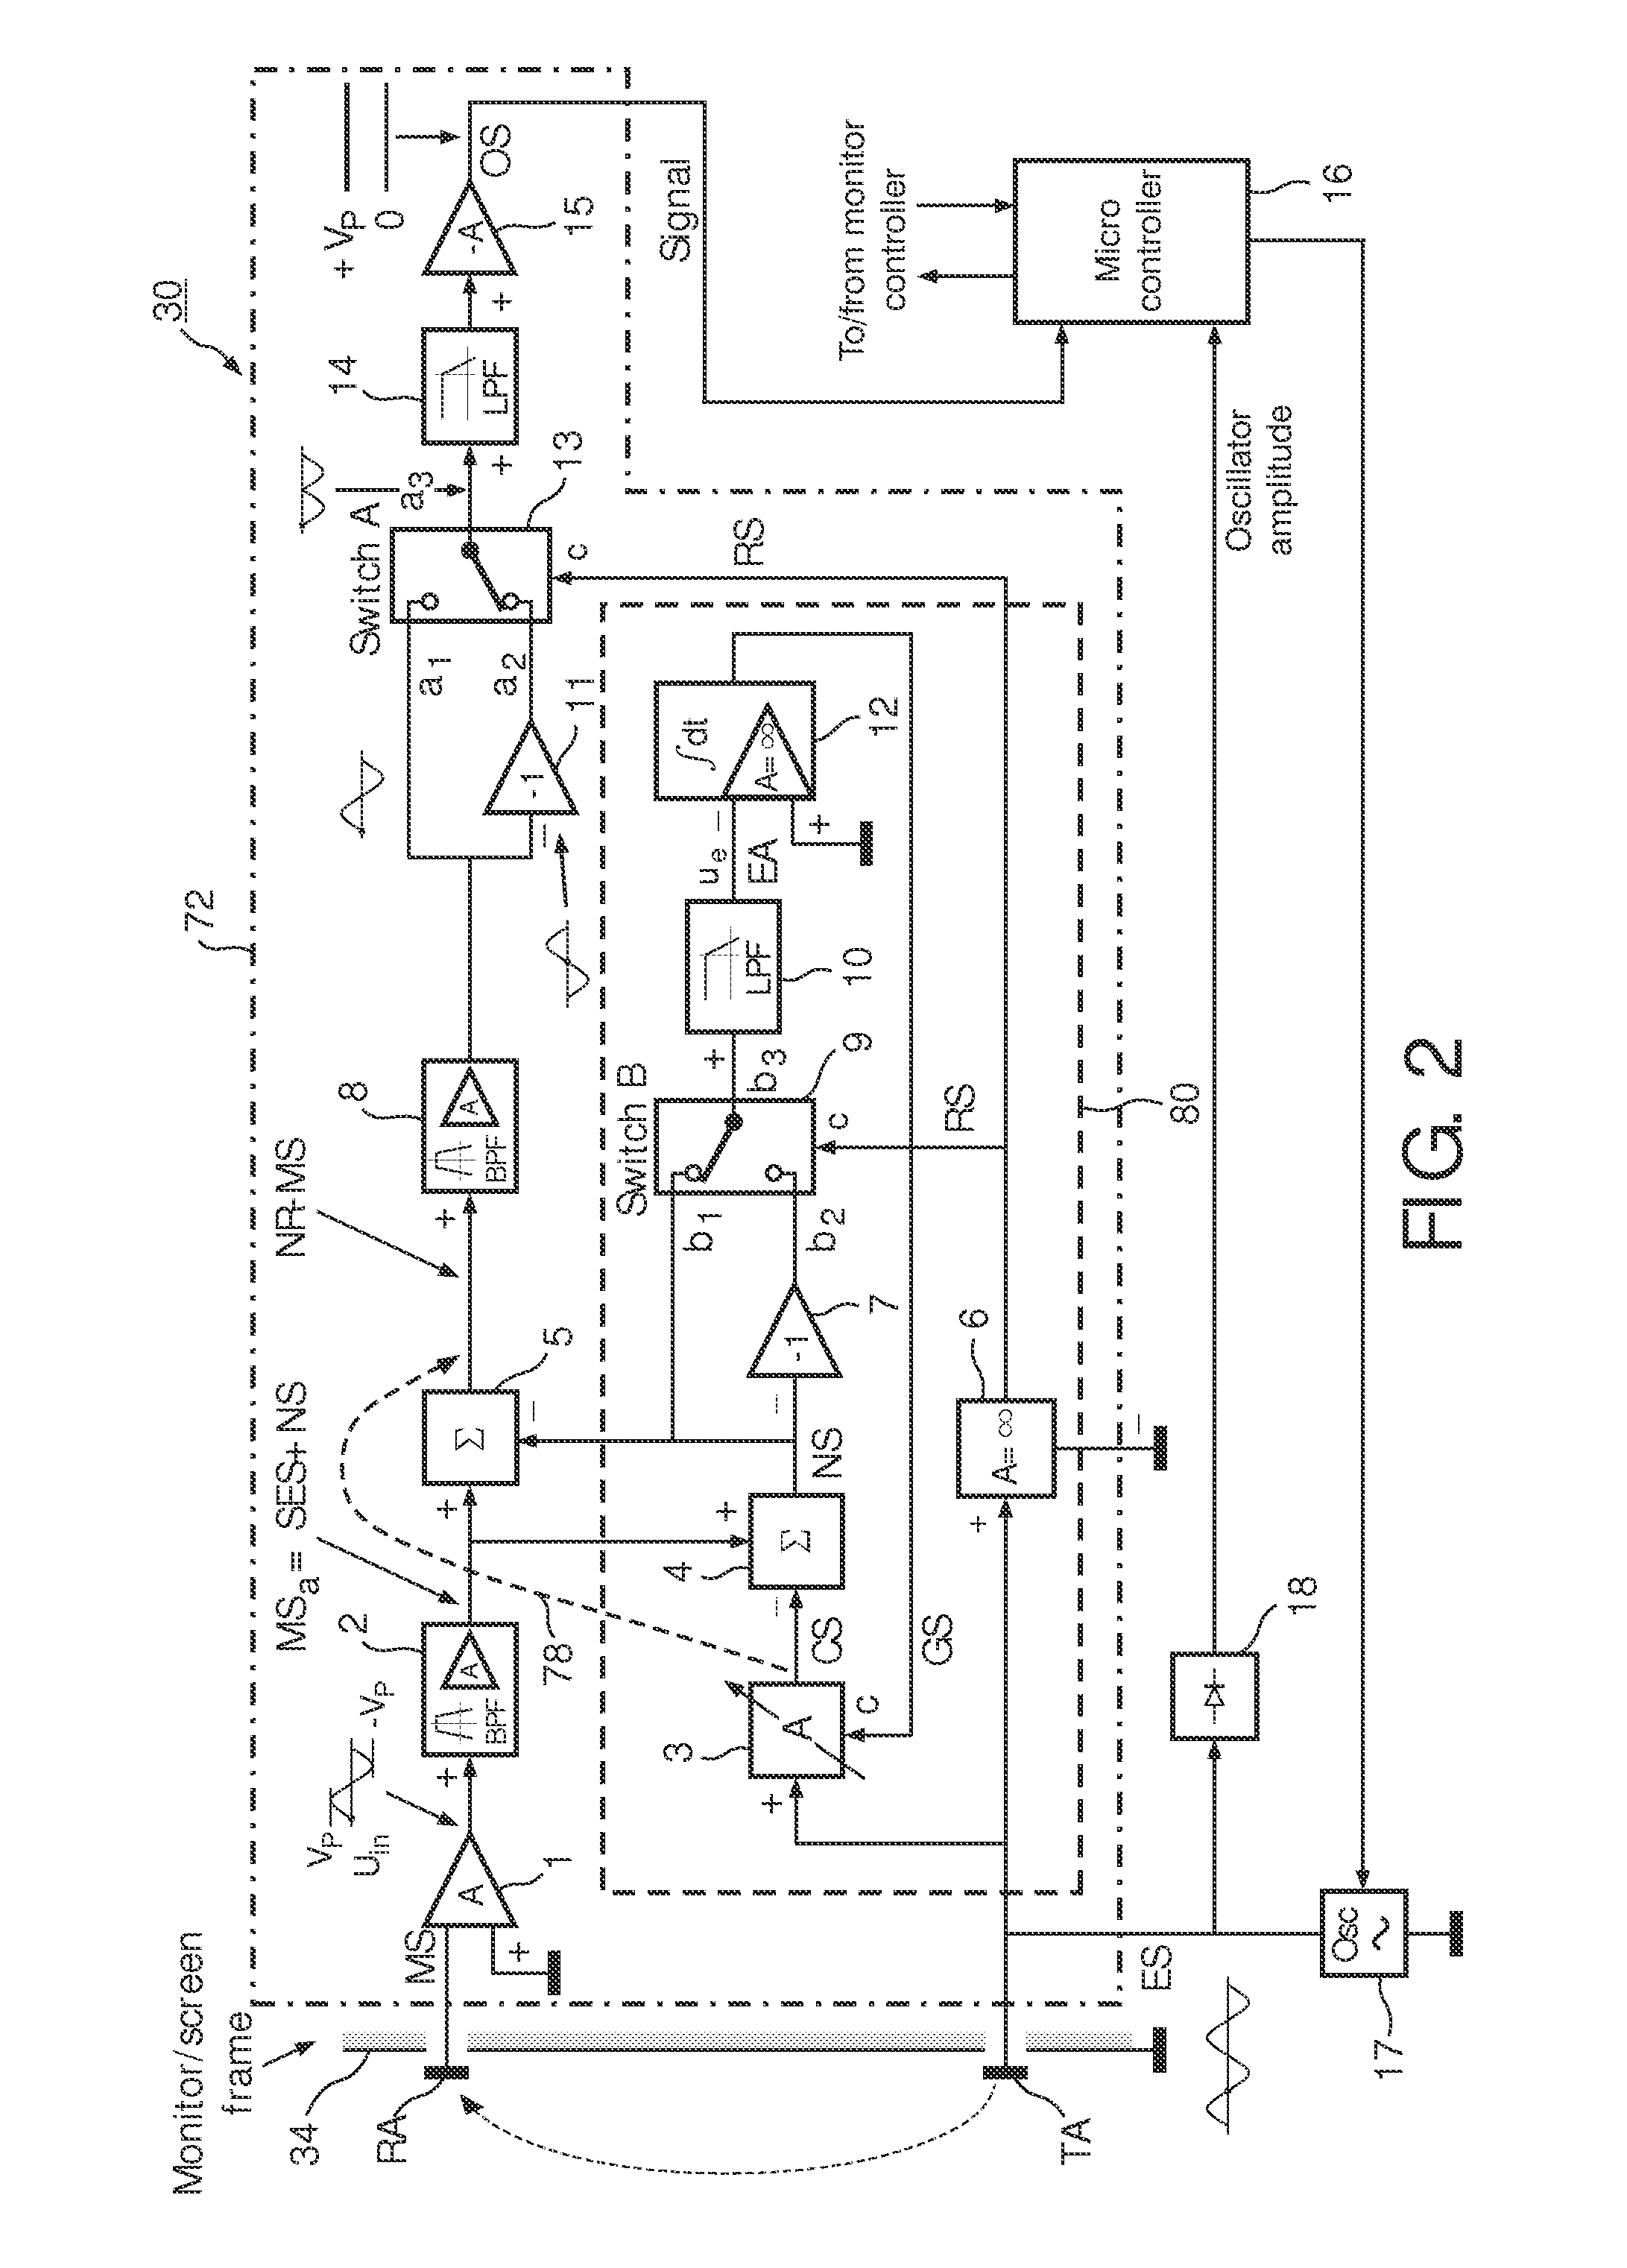 Capacitive proximity device and electronic device comprising the capacitive proximity device